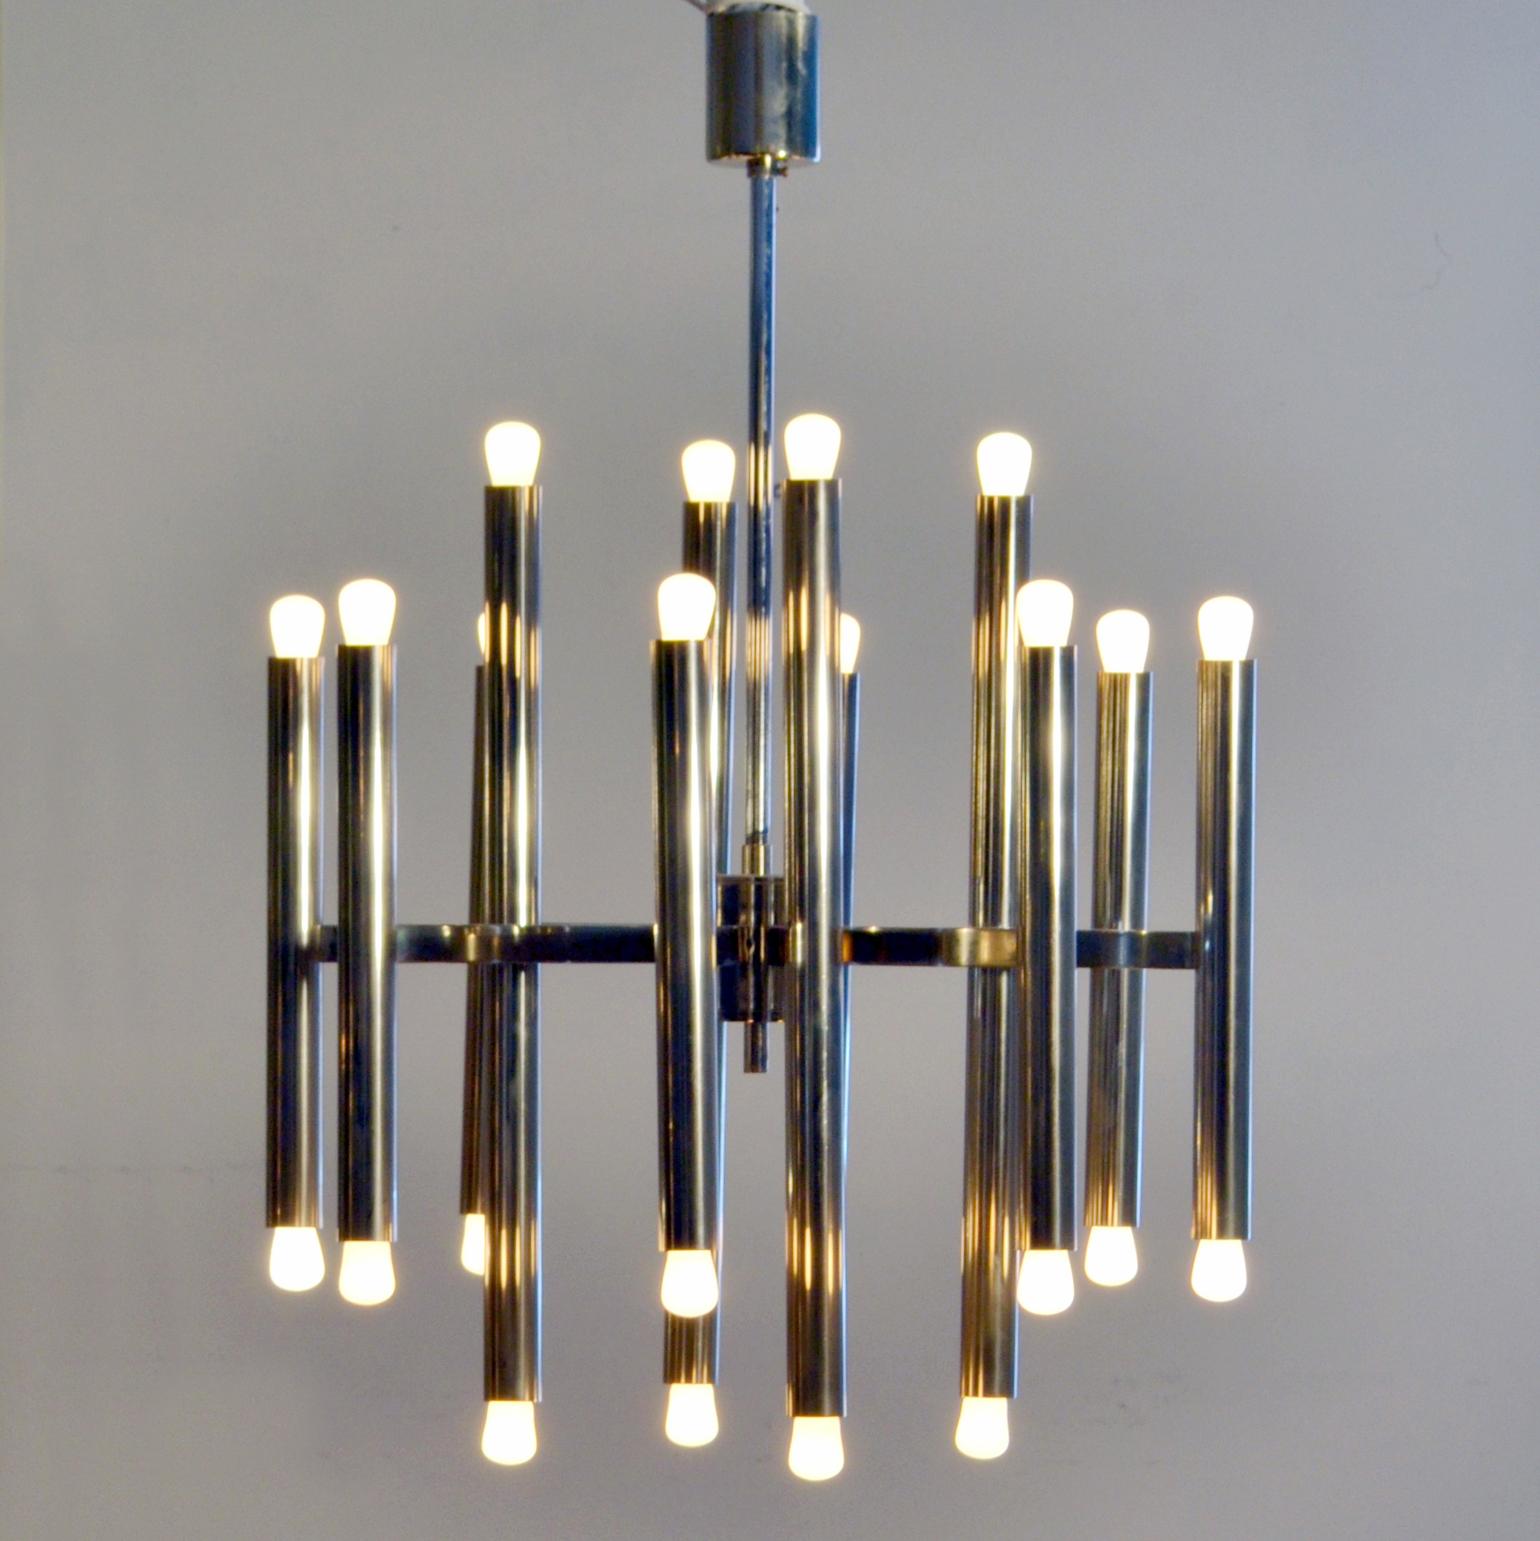 Minimal nickel-plated up-down lighter chandelier by Sciolary, Italy 1960s carries 24 pygmy or golf bulb lamps.


Rewired and ready for immediate use.